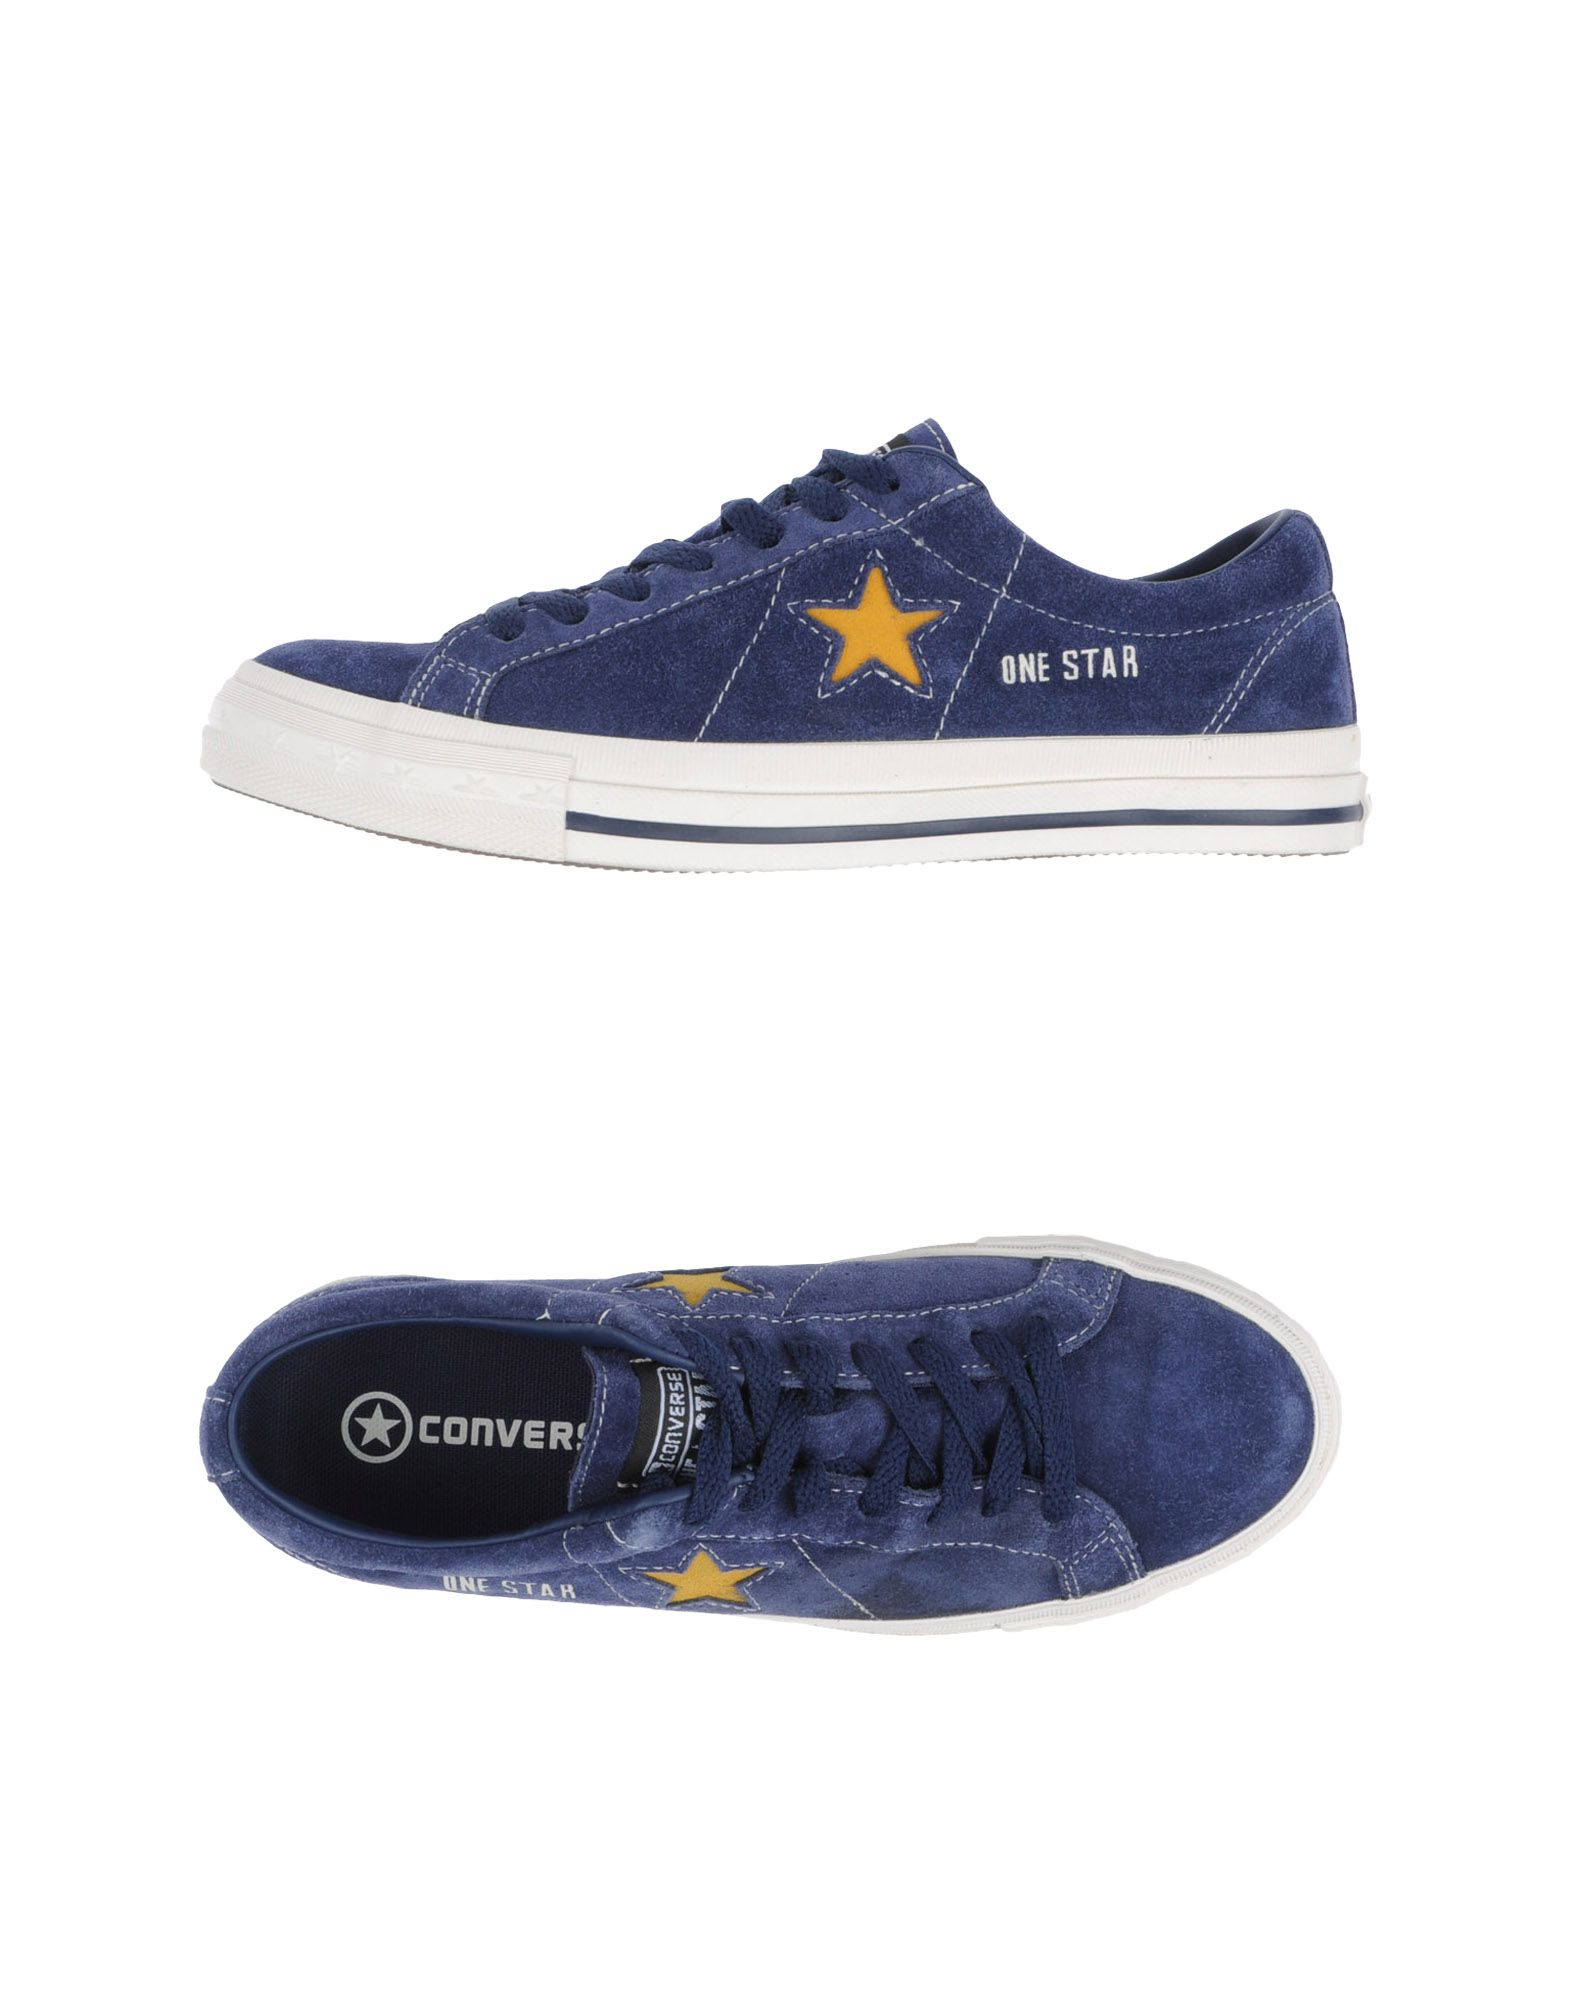 Foto converse one star sneakers
